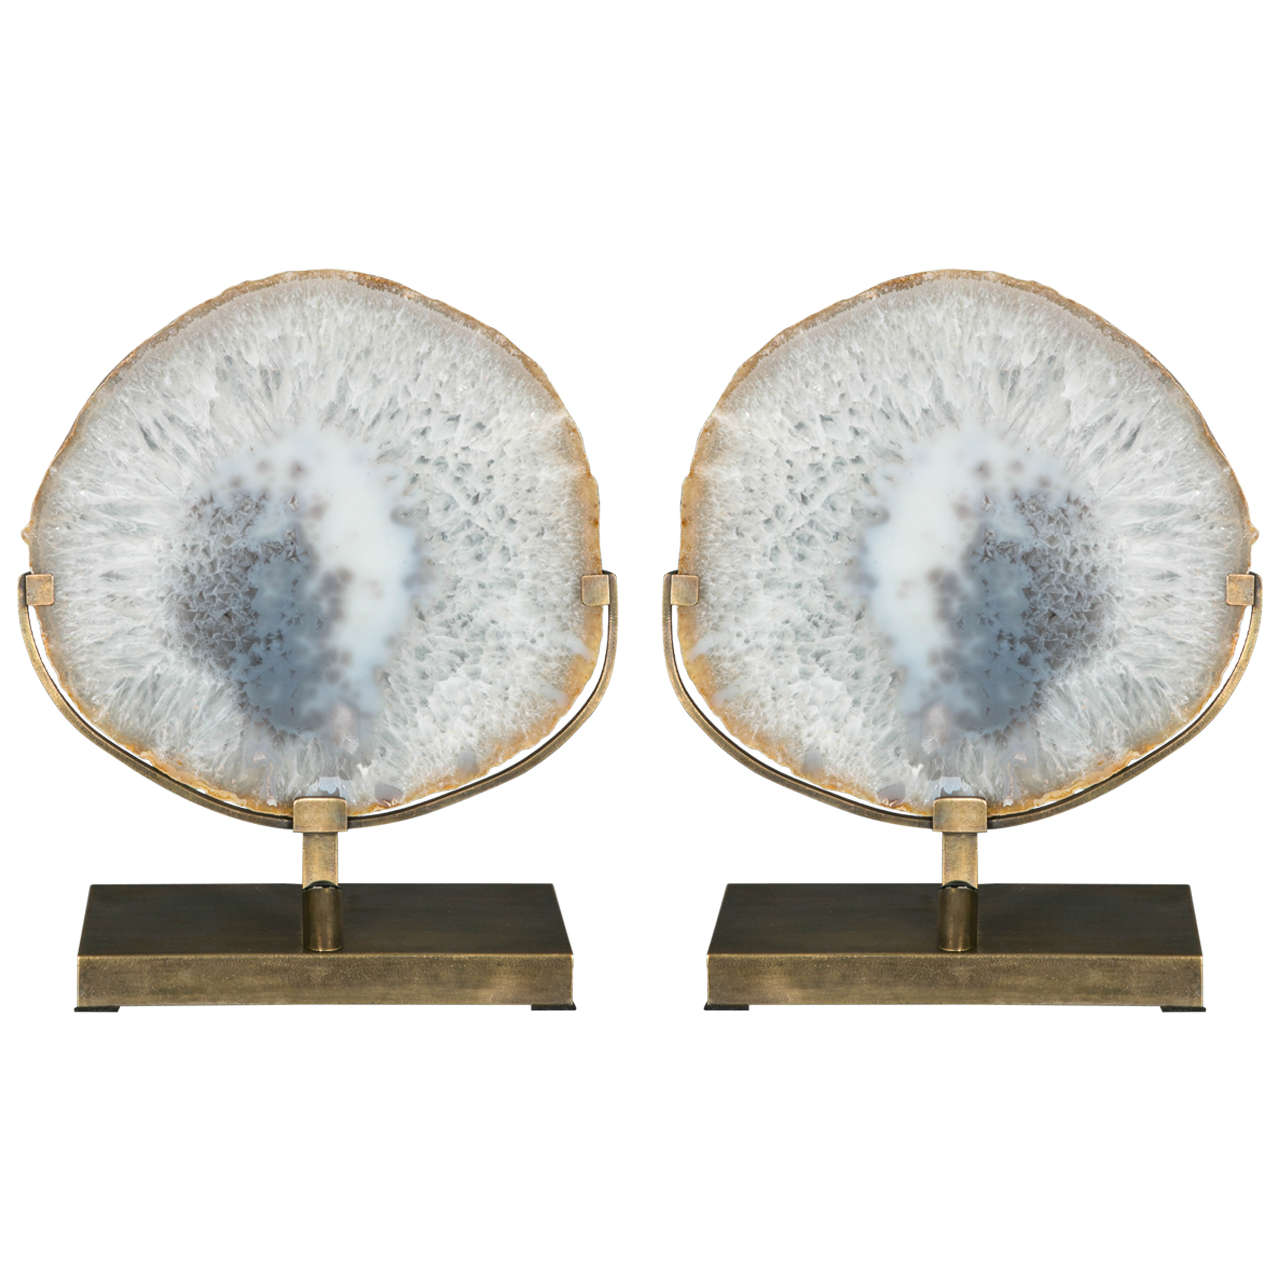 Pair of Agate Table Lamps